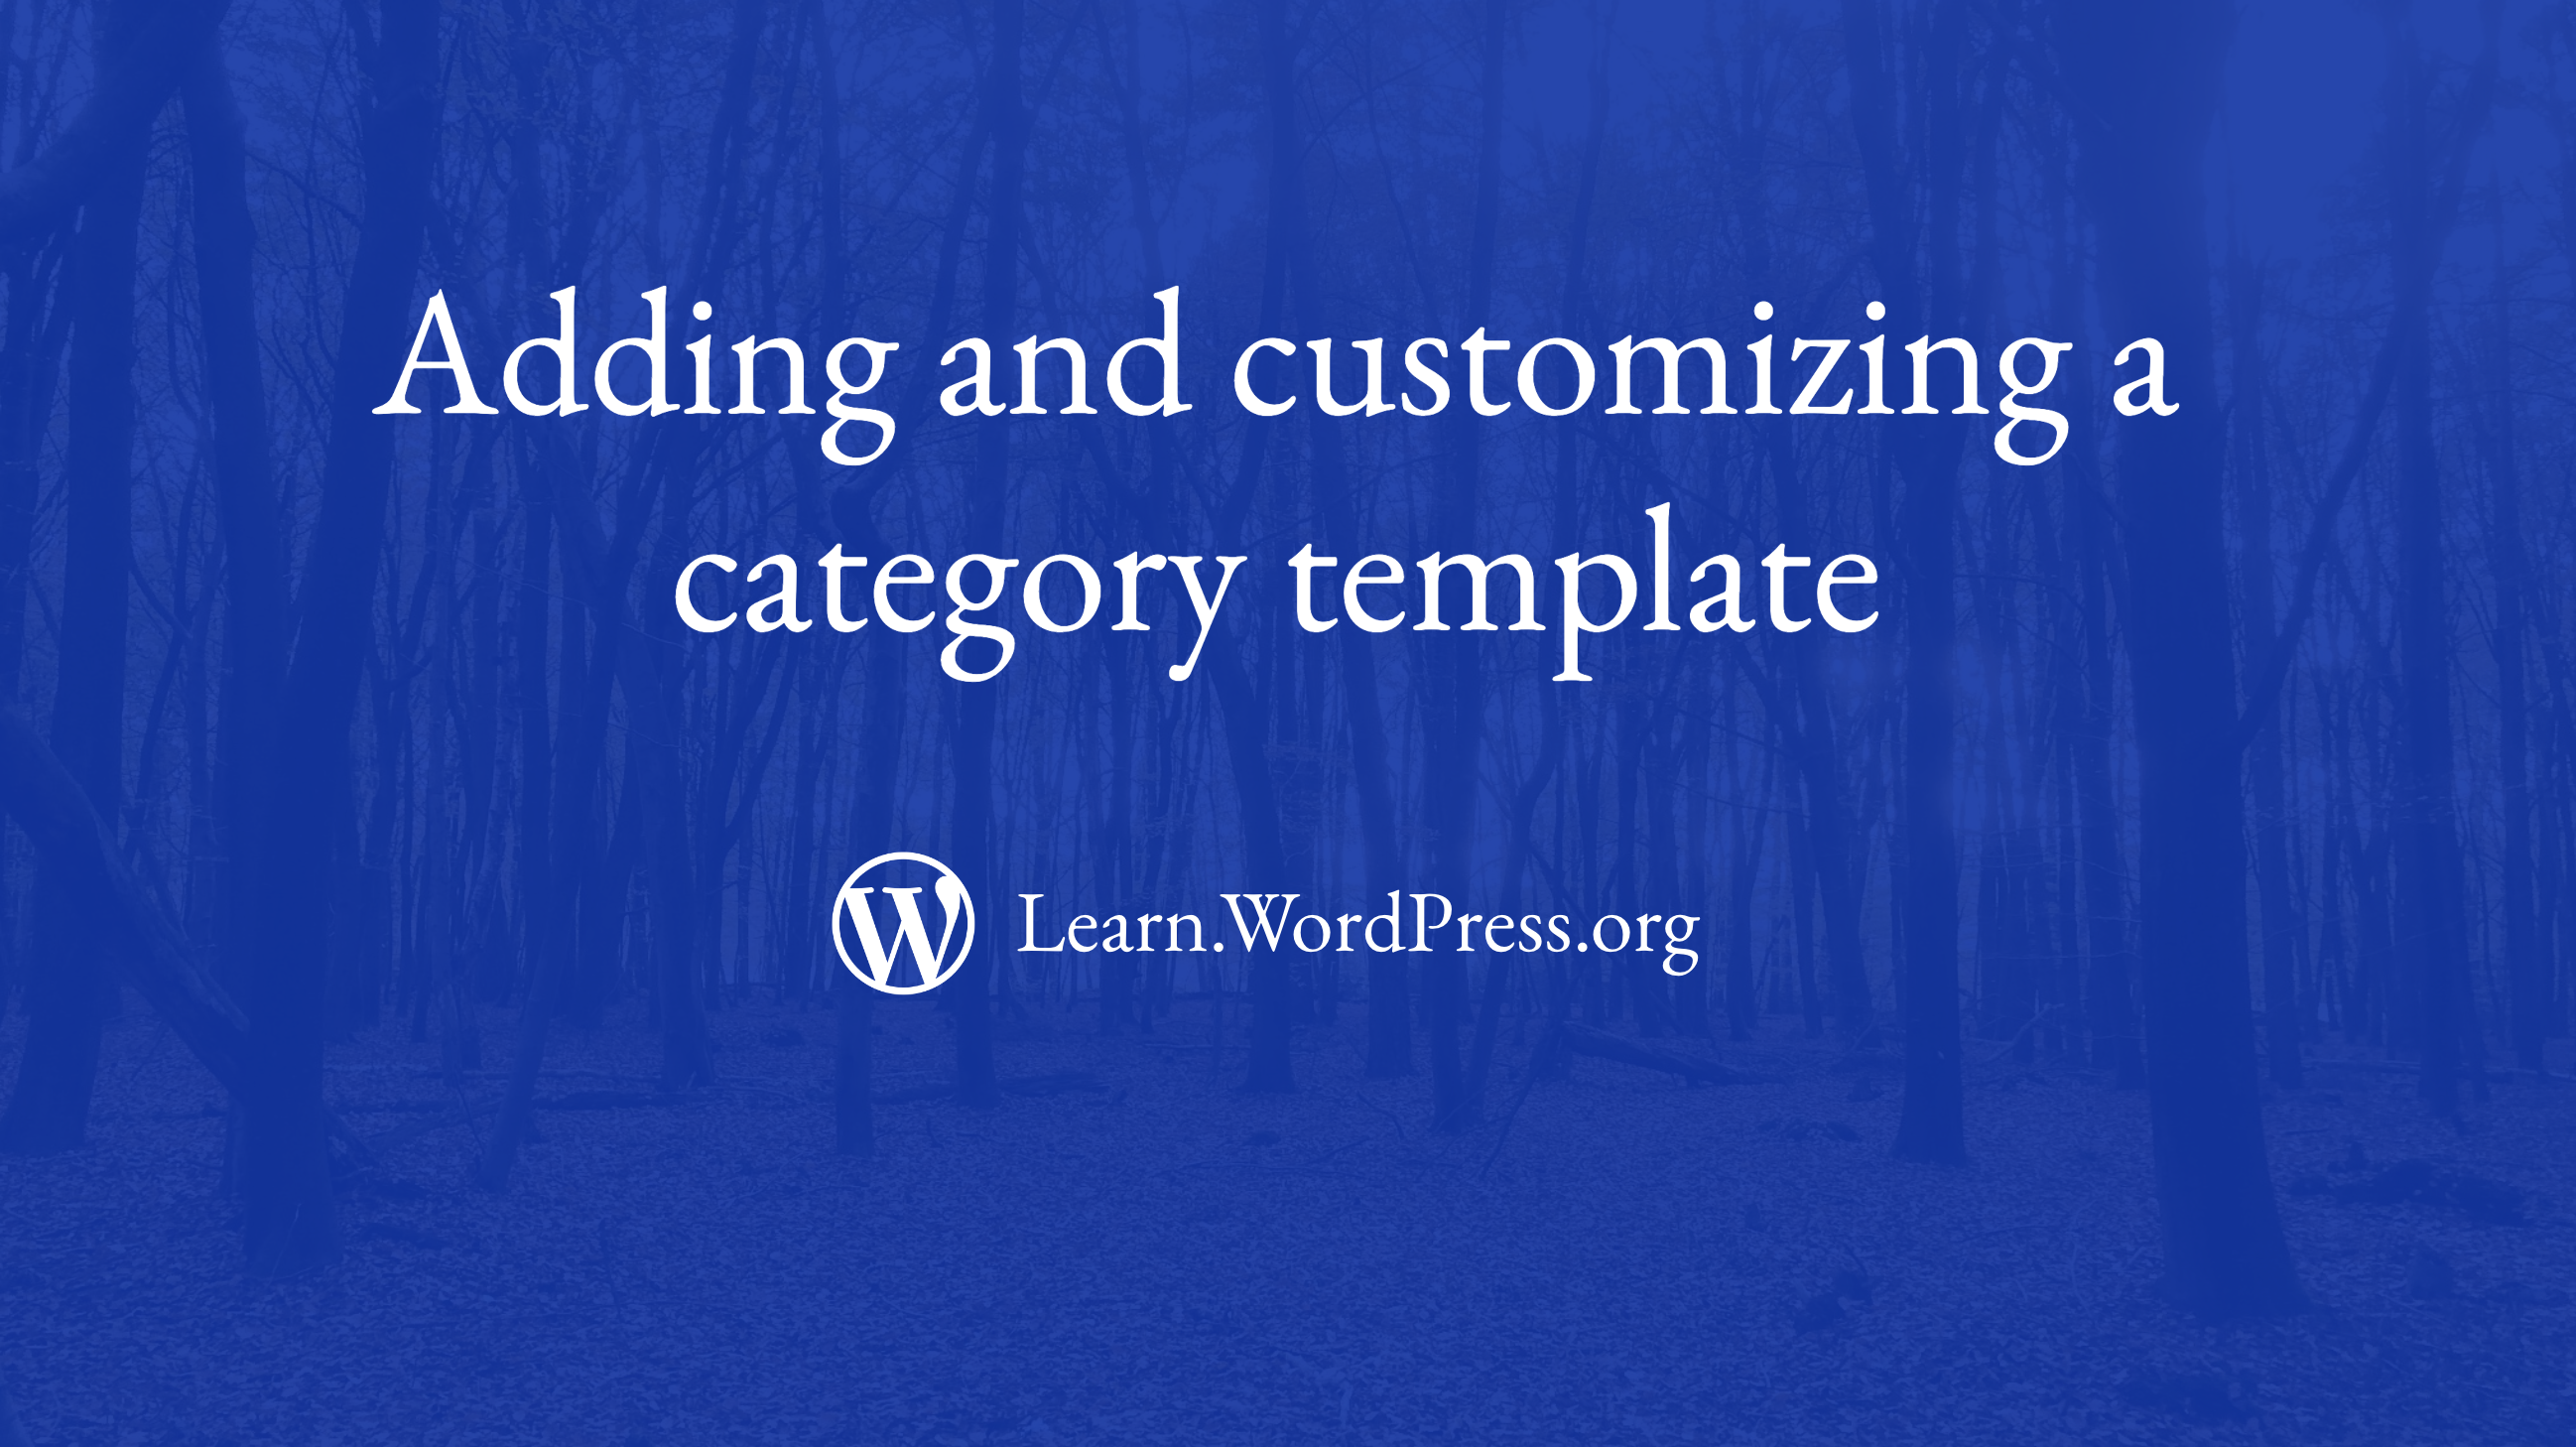 Adding and customizing a category template